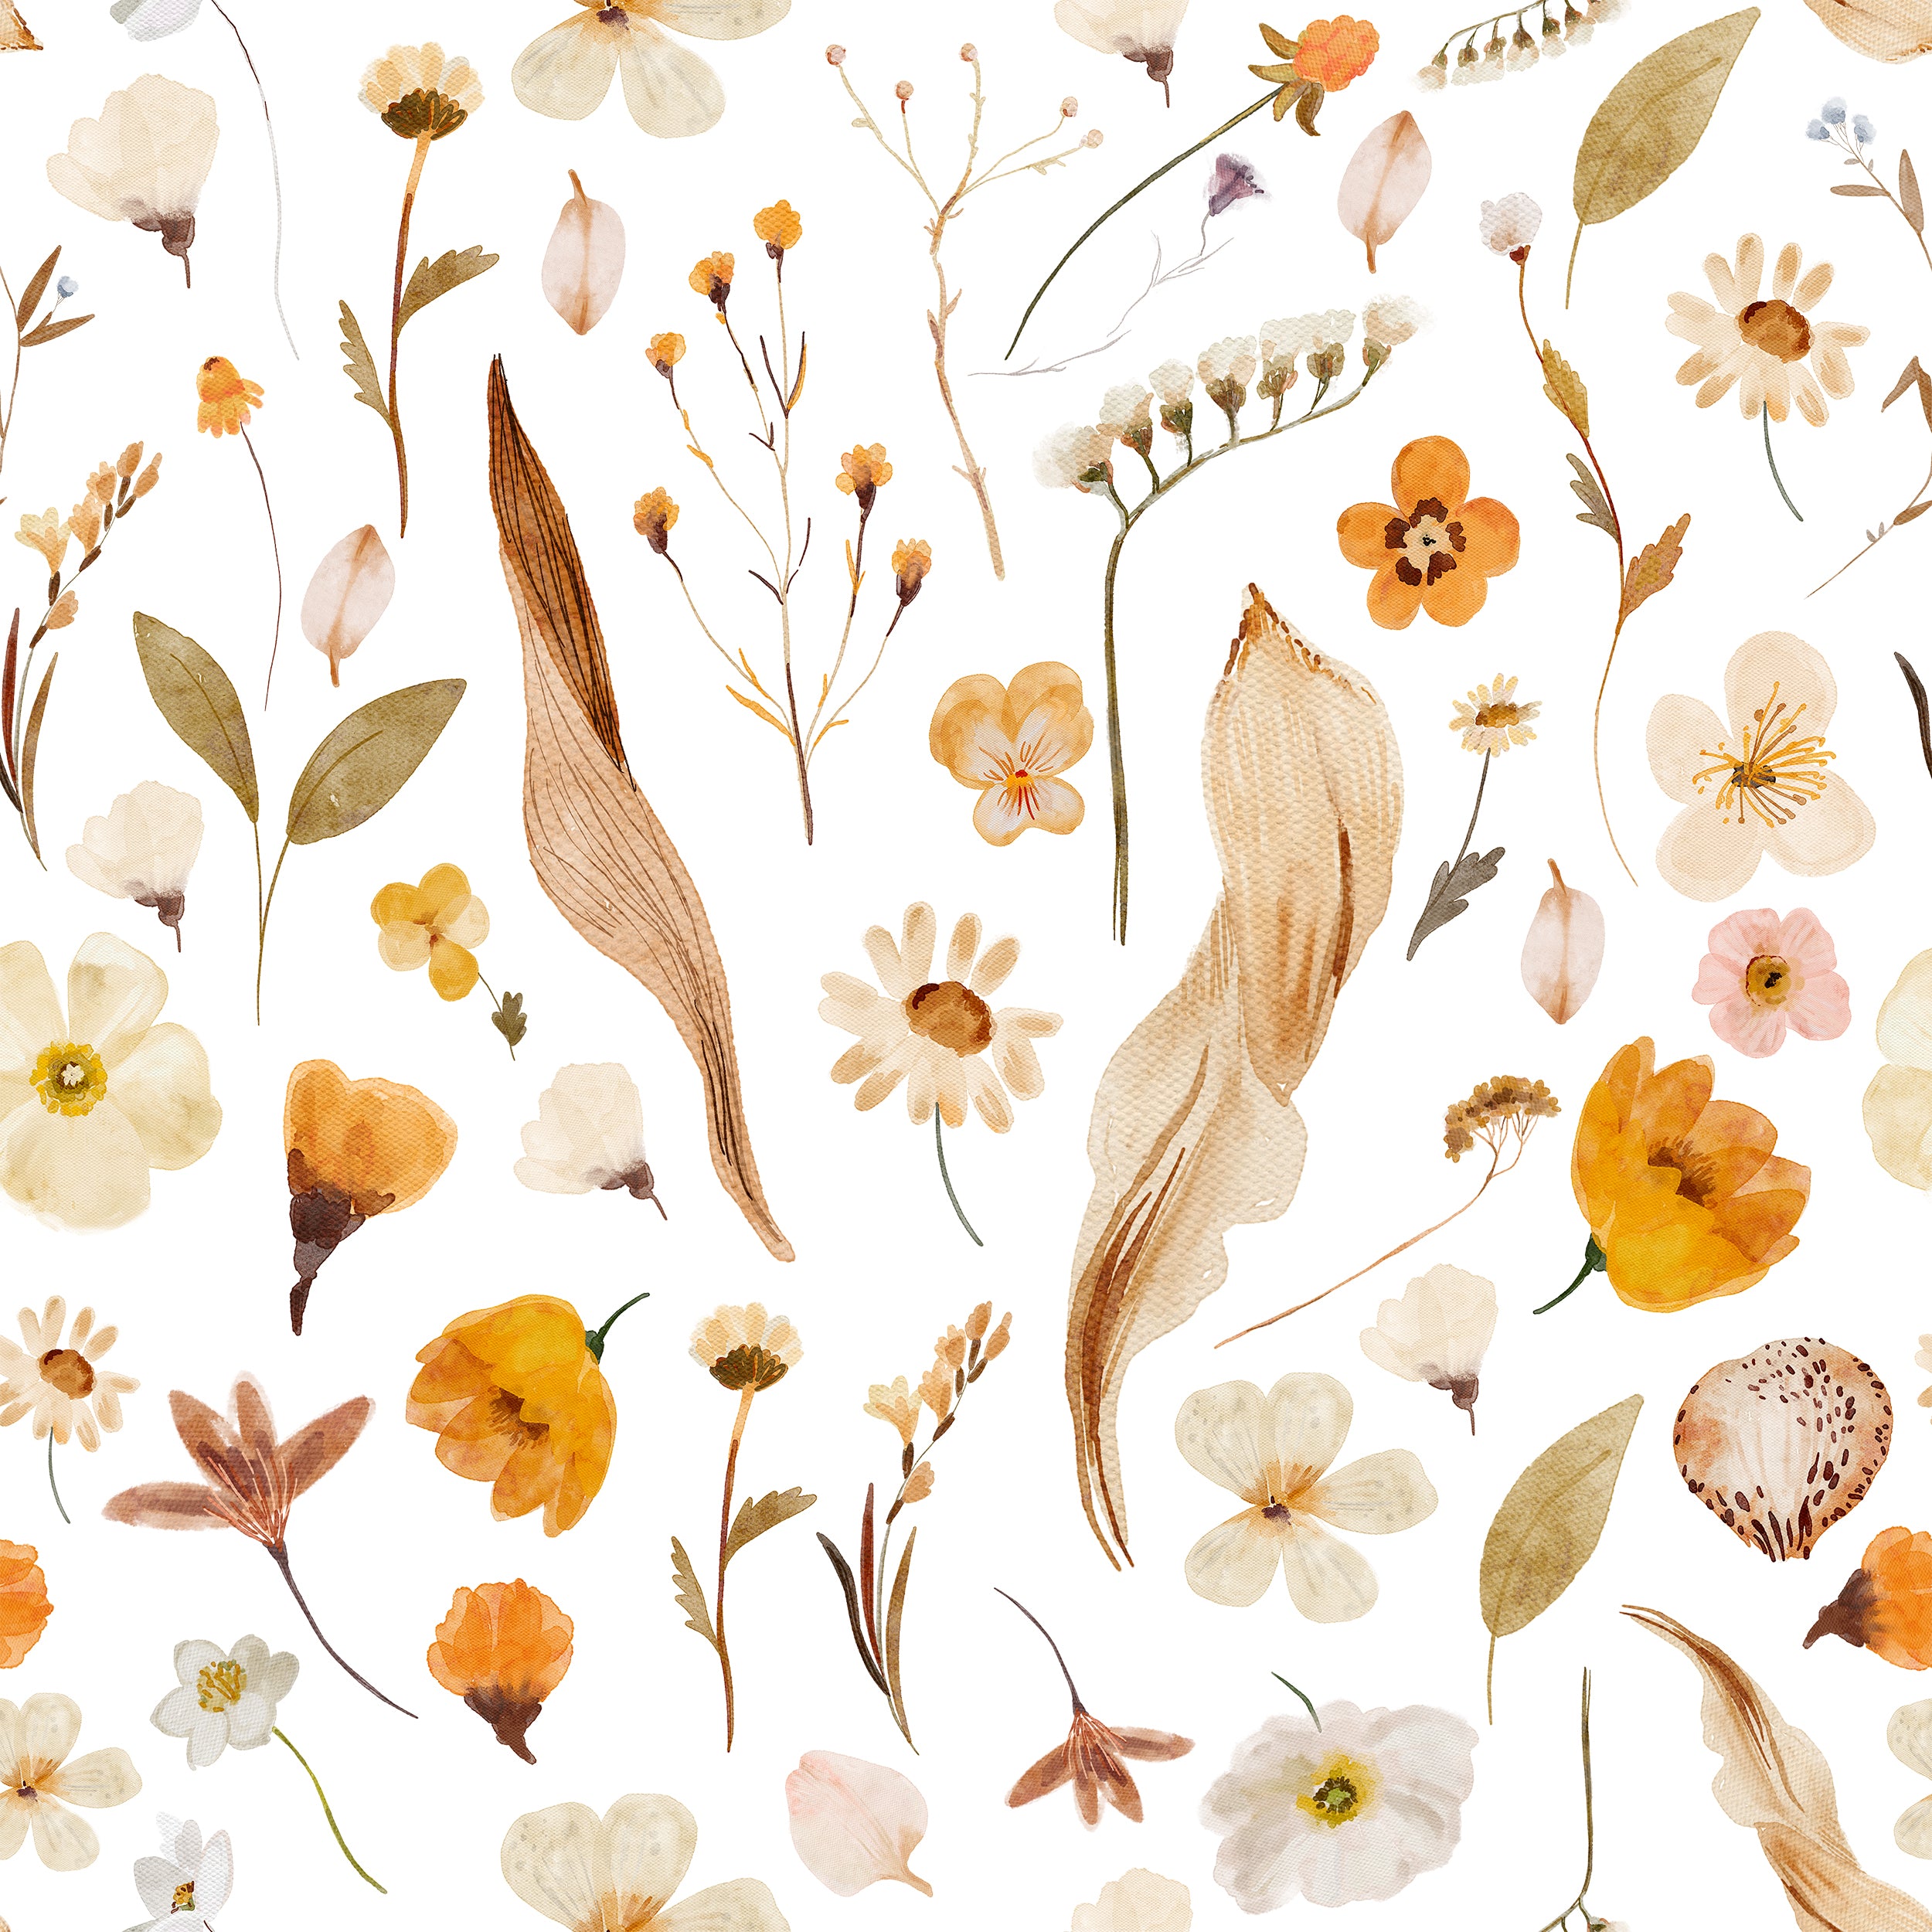 Close-up view of the Boho Dreams Wallpaper displaying a detailed and colorful botanical print. The design includes various types of flowers, leaves, and plant elements in soft watercolor shades, providing a tranquil and artistic backdrop.